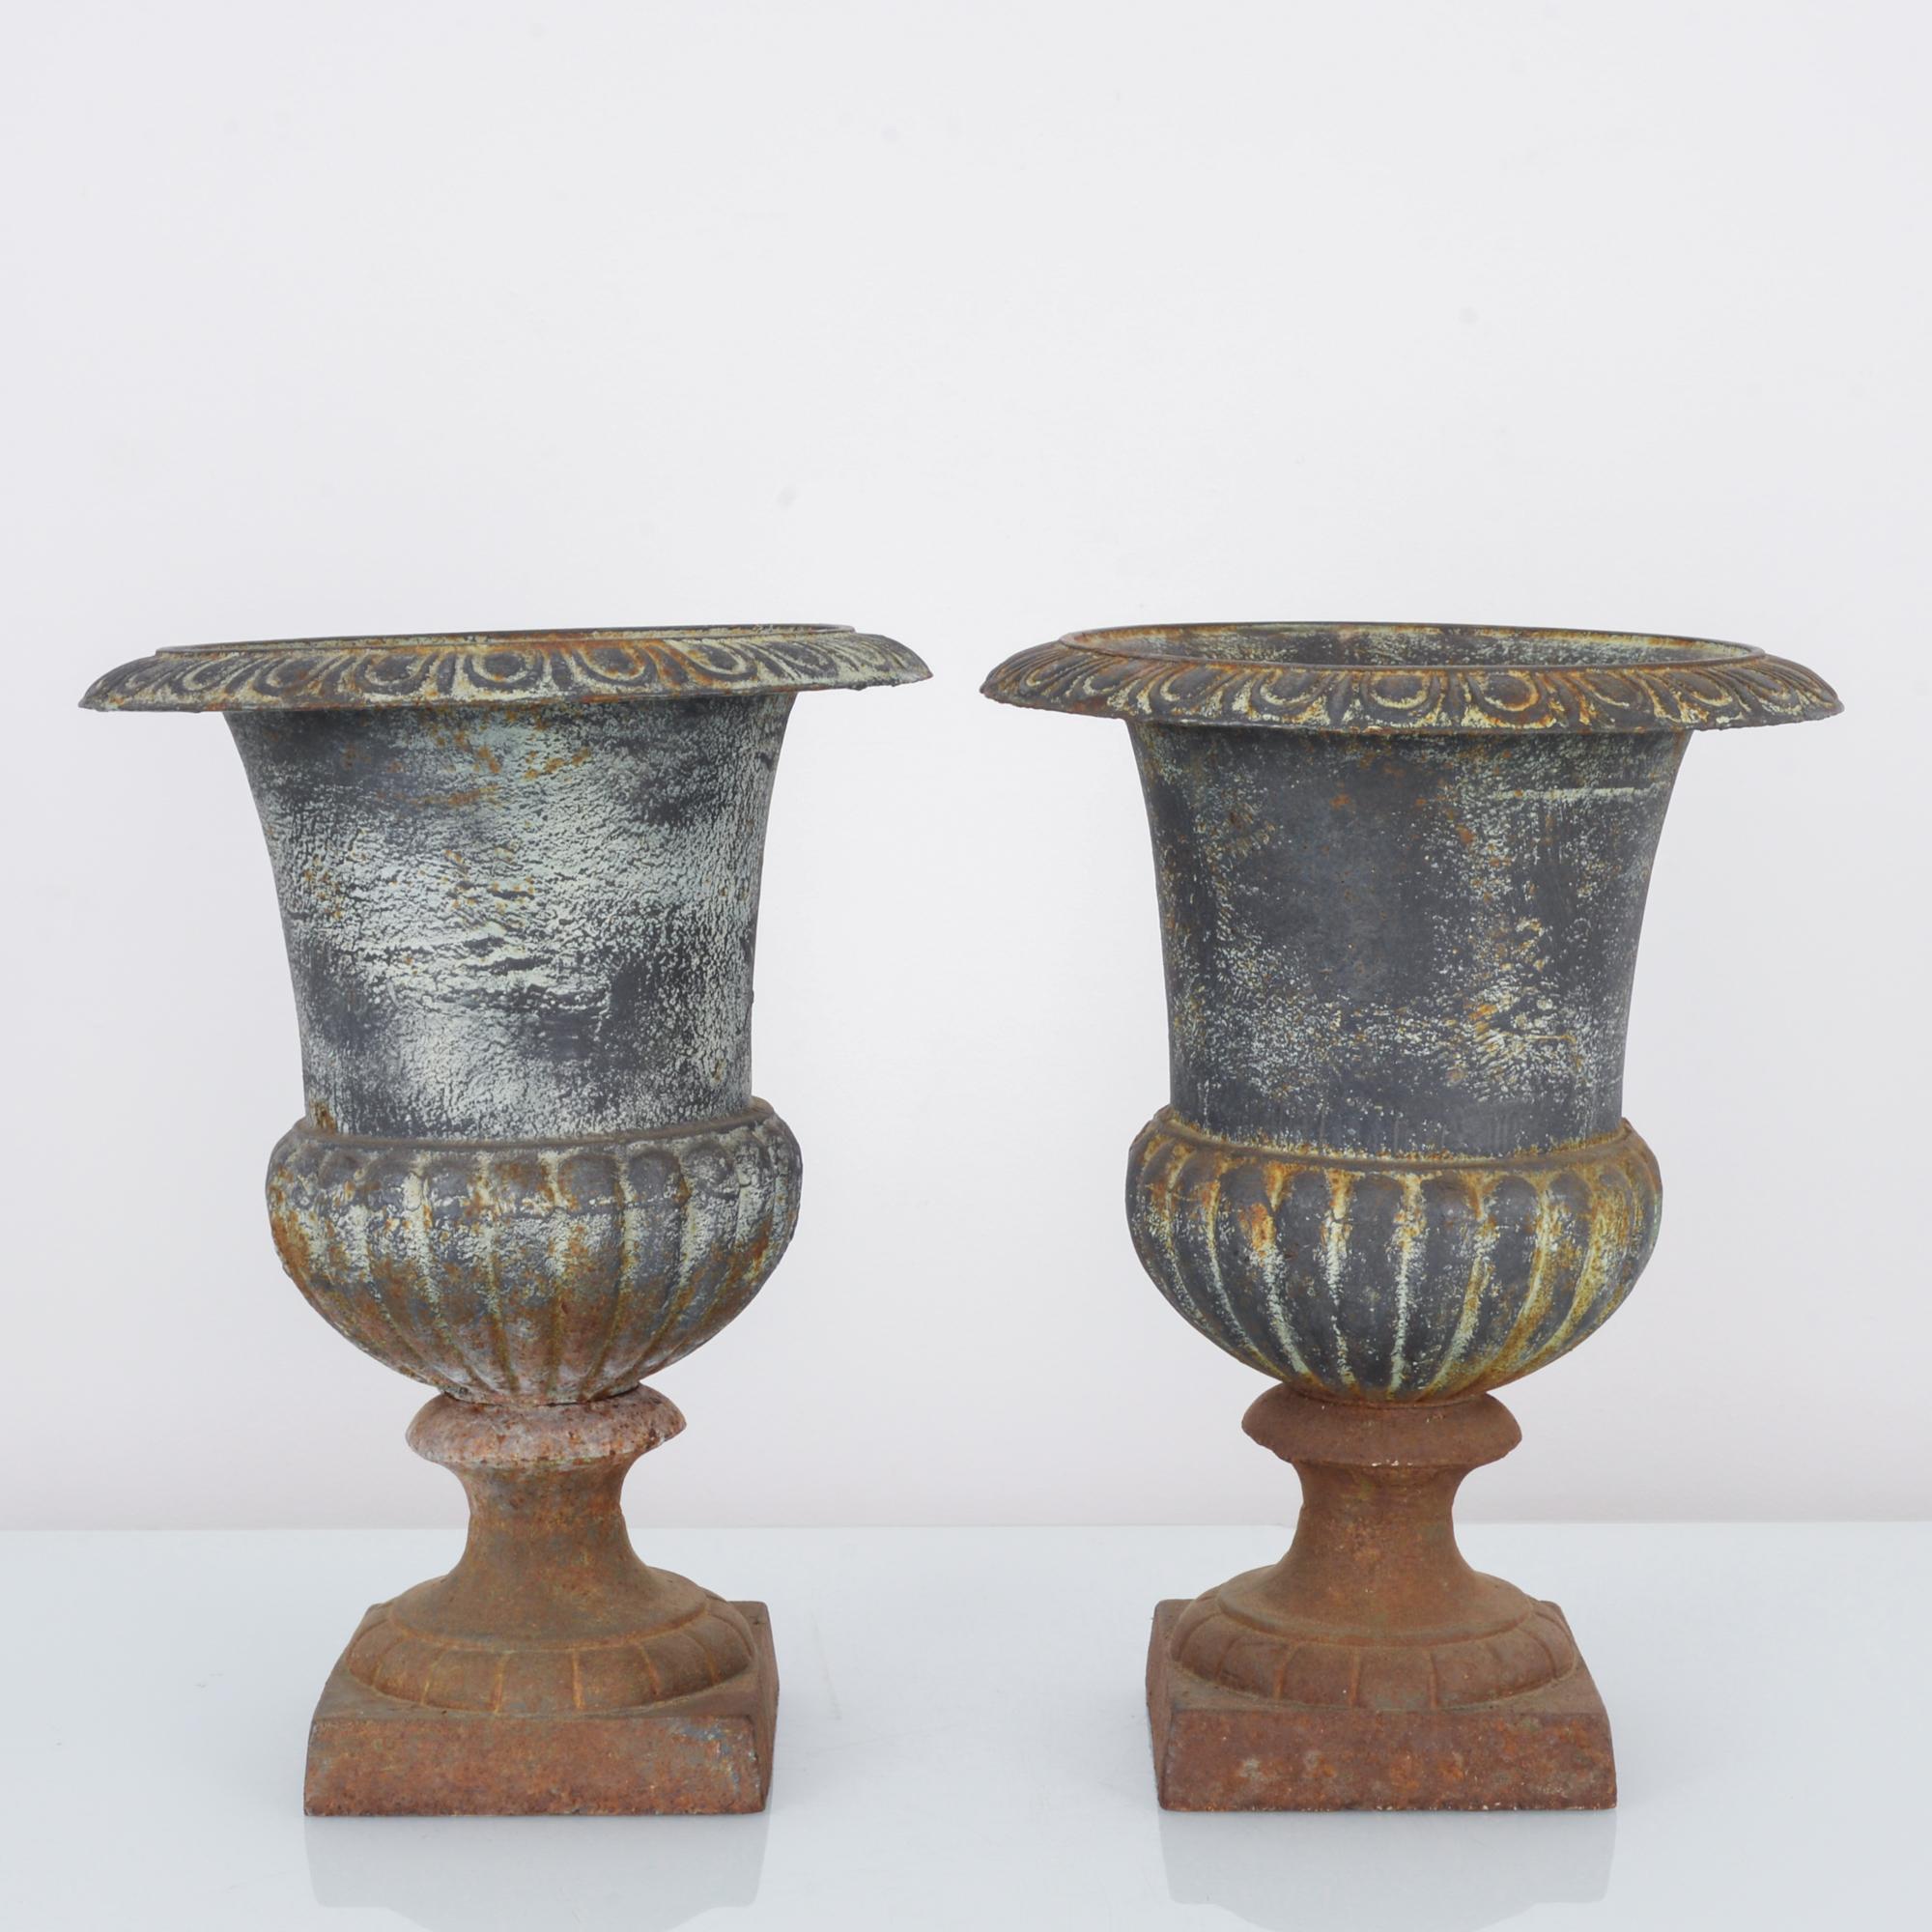 A pair of cast iron planters from France, circa 1920. An upturned bell-shape with a fluted cupola and broad lip, reminiscent of an inverted blossom elevated upon a stem. The tone of the metal has acquired a striking color gradient: steel blue and